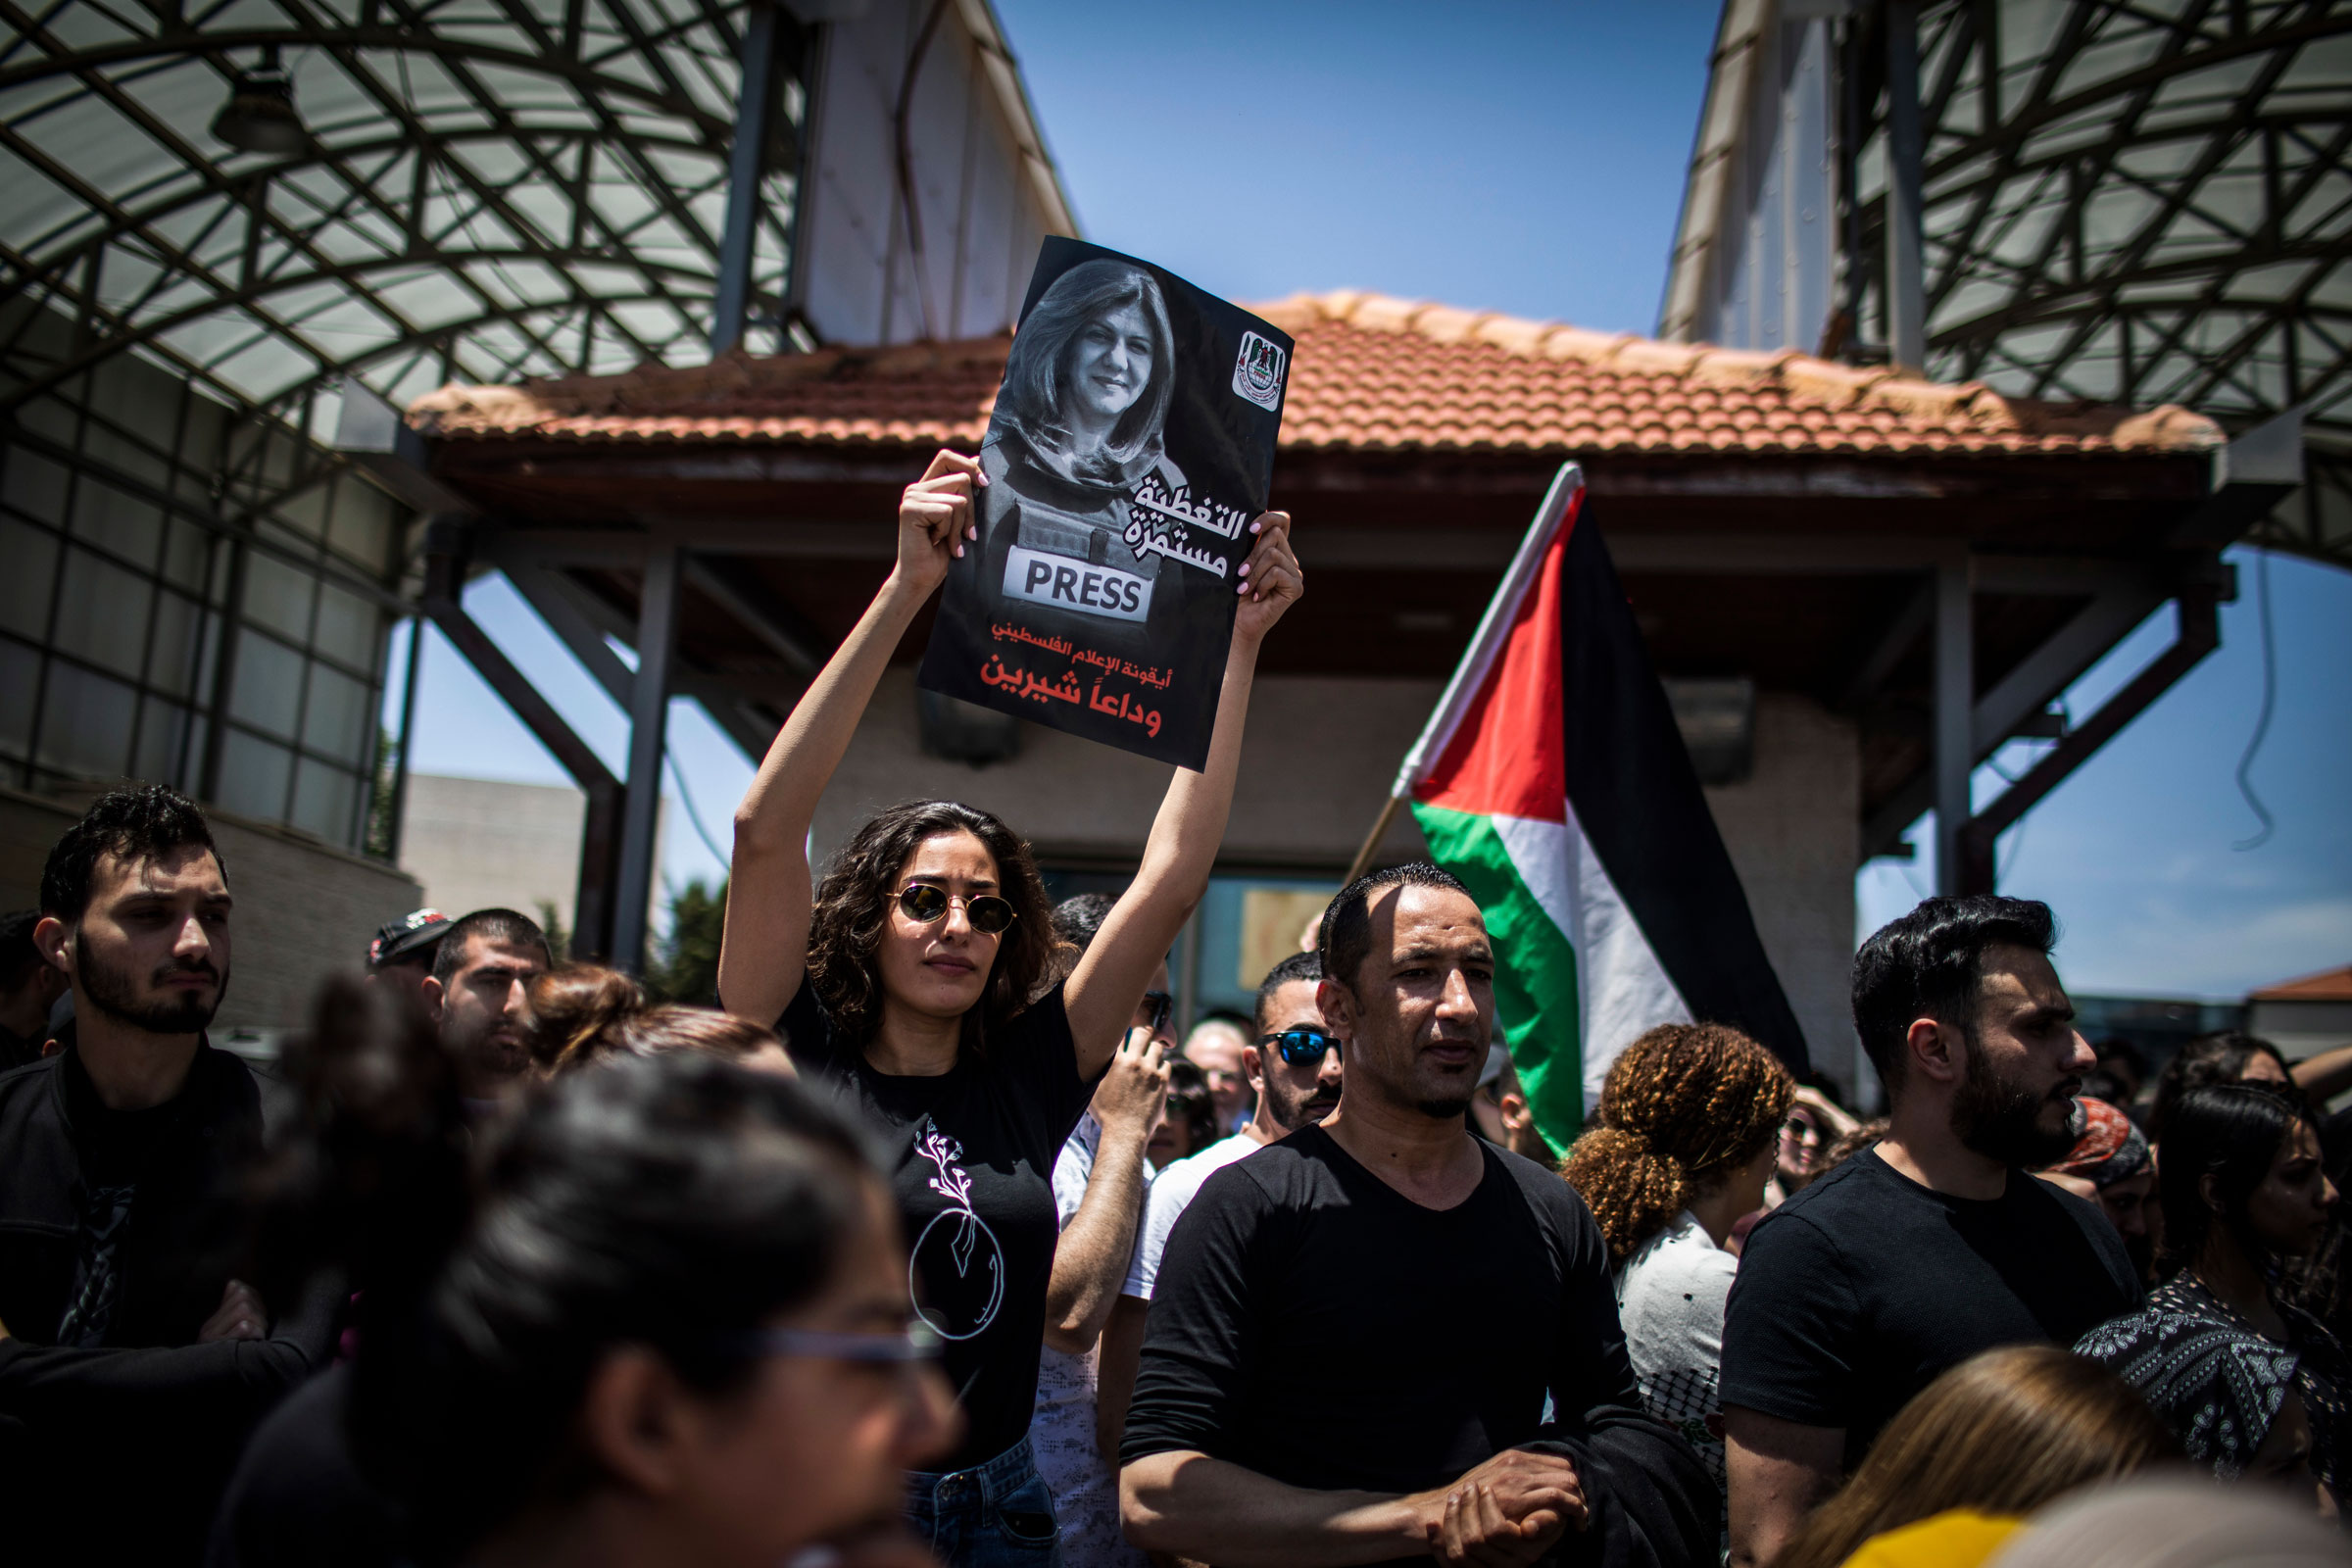 Palestinians attend the state funeral of Al Jazeera reporter Shireen Abu Akleh at the President's Residency in Ramallah. (Ilia Yefimovich—picture alliance/Getty Images)